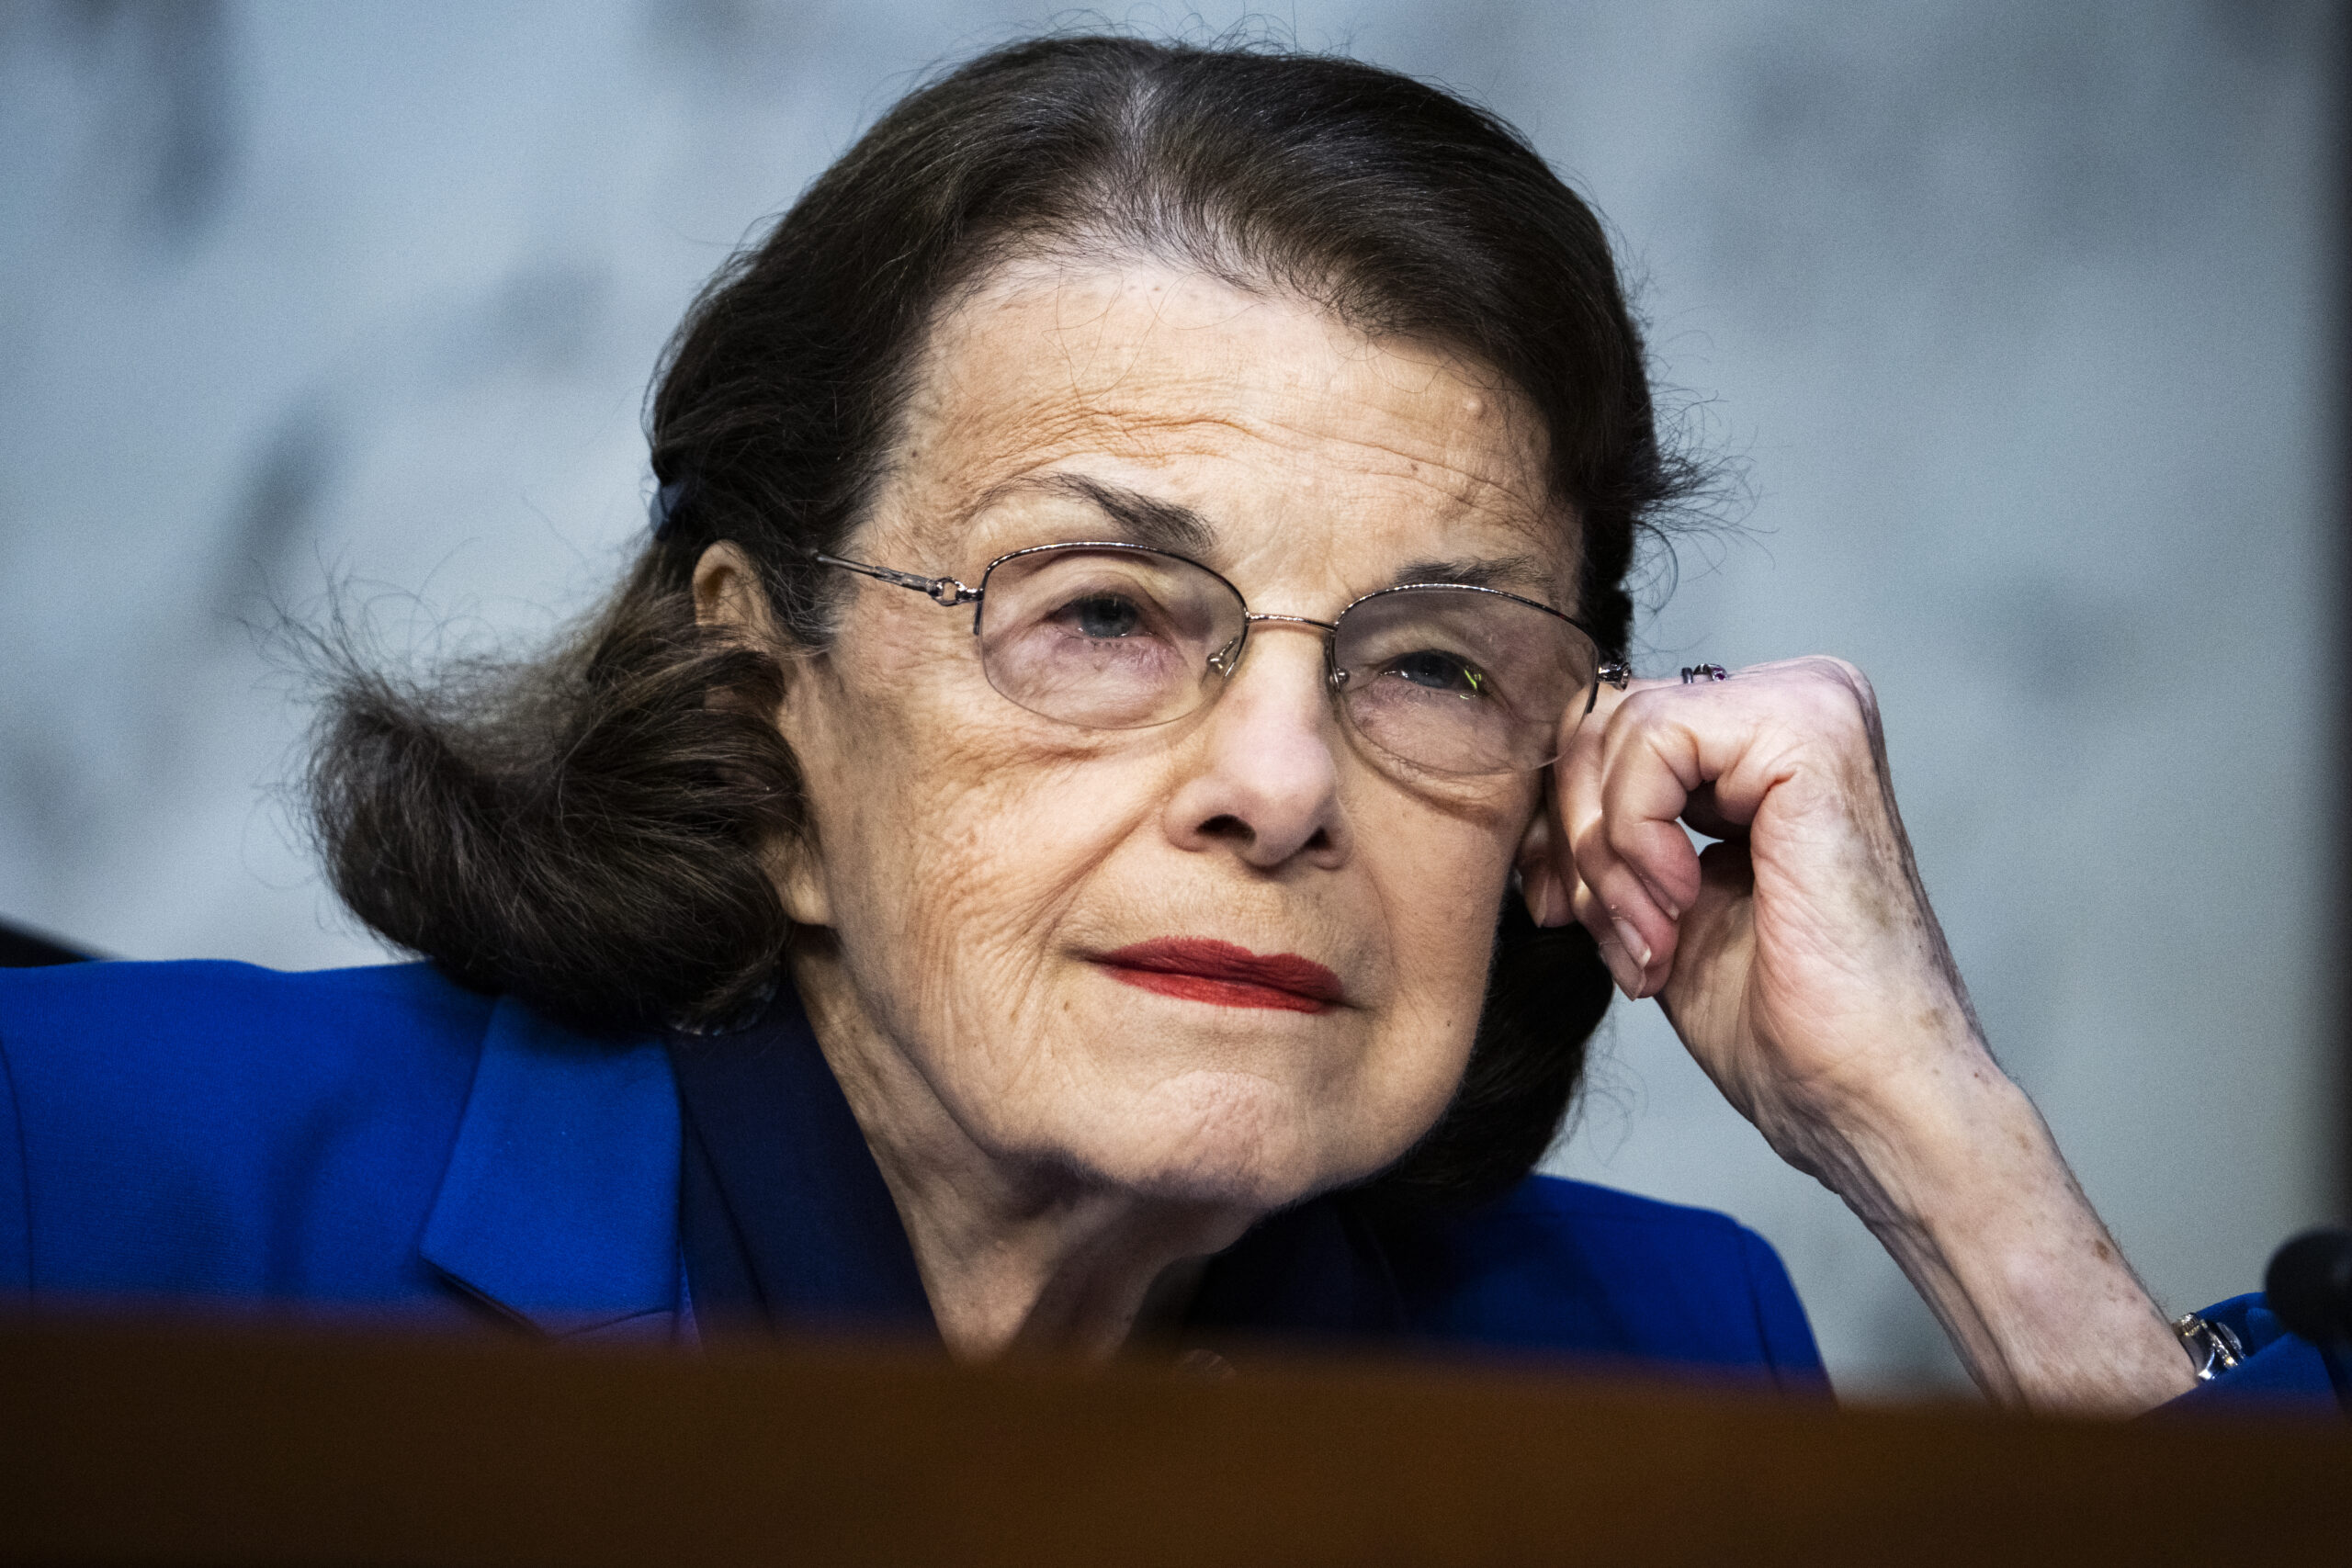 Dianne Feinstein Appears Unaware She Just Missed Three Months of Senate Business: ‘I’ve Been Here. I’ve Been Voting’